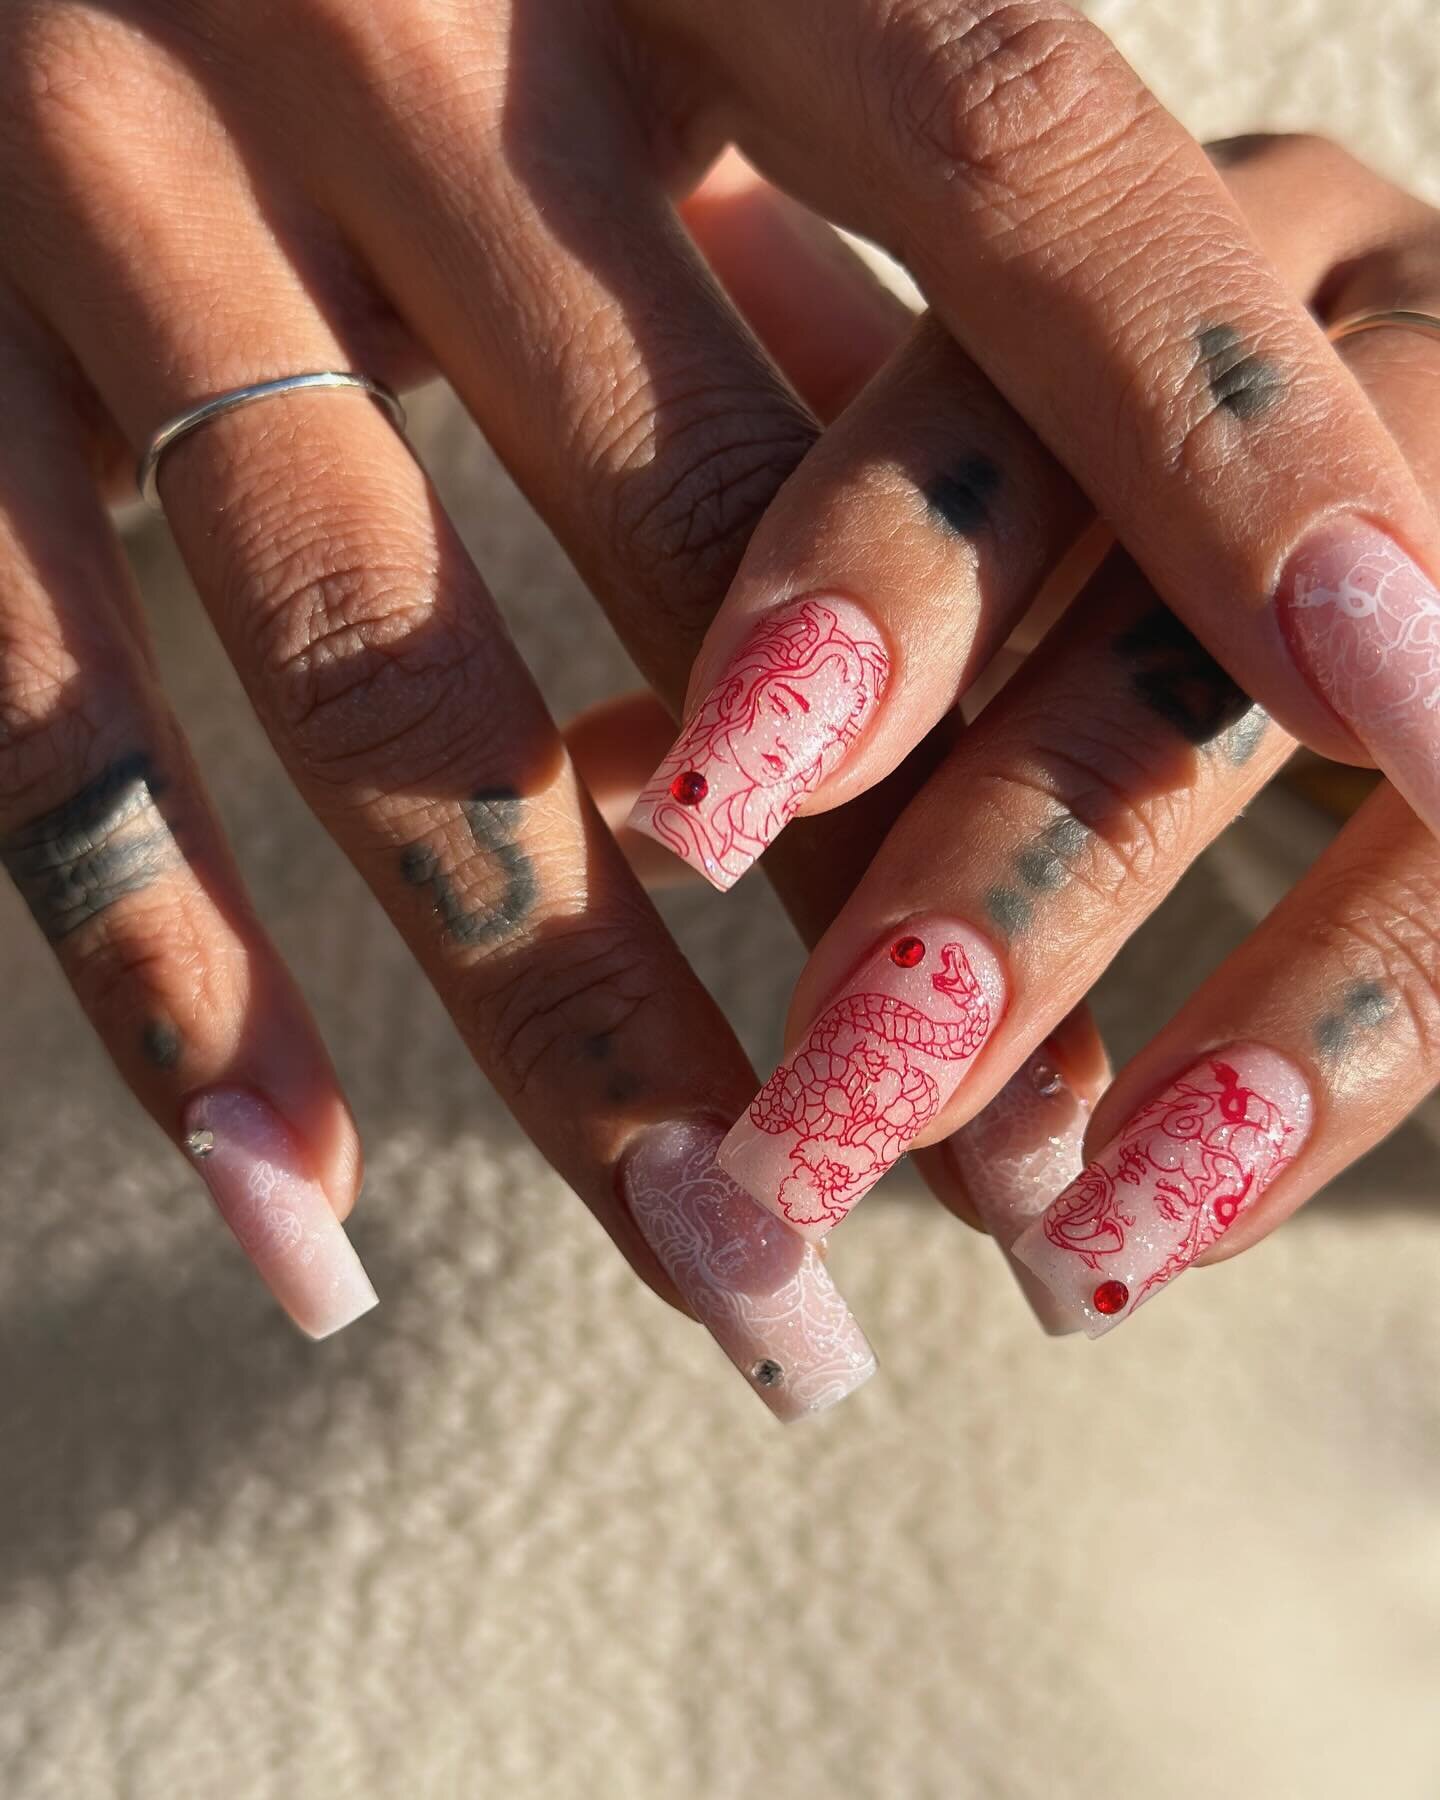 Sculpted extensions with stamped Medusa 🐍 designs and perfectly placed bling 💎

👩&zwj;🎨 Artist: Daryna
🎨 Products: Crystal Professional @crystal.professional 
📖 Book it: Sculpted extensions + Moderate design 

#torontonails #torontomanicure #to